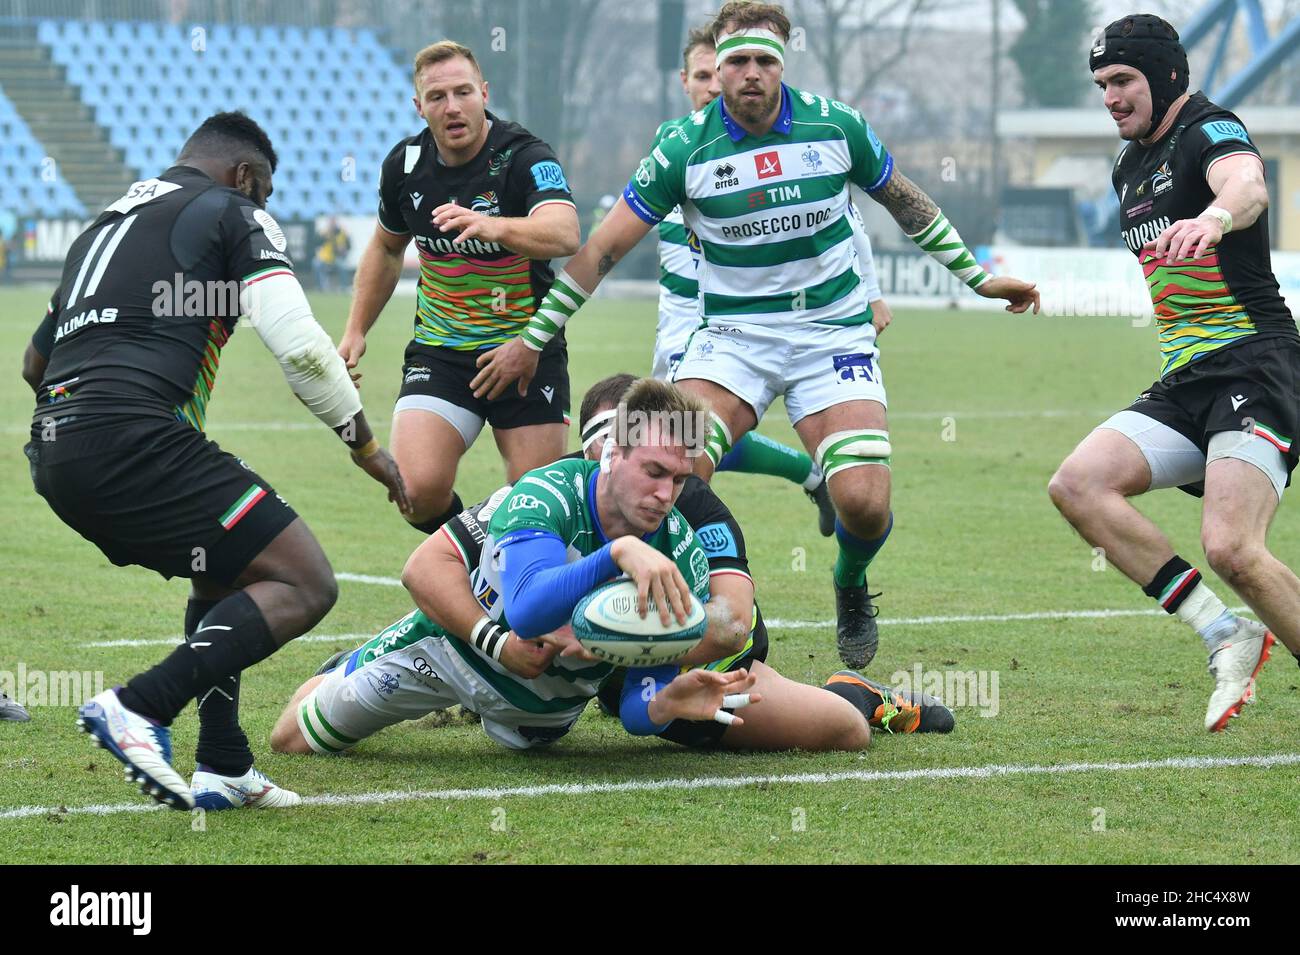 Parma, Italy. 24th Dec, 2021. federico ruzza (benetton) scores during Zebre  Rugby Club vs Benetton Rugby, United Rugby Championship match in Parma,  Italy, December 24 2021 Credit: Independent Photo Agency/Alamy Live News